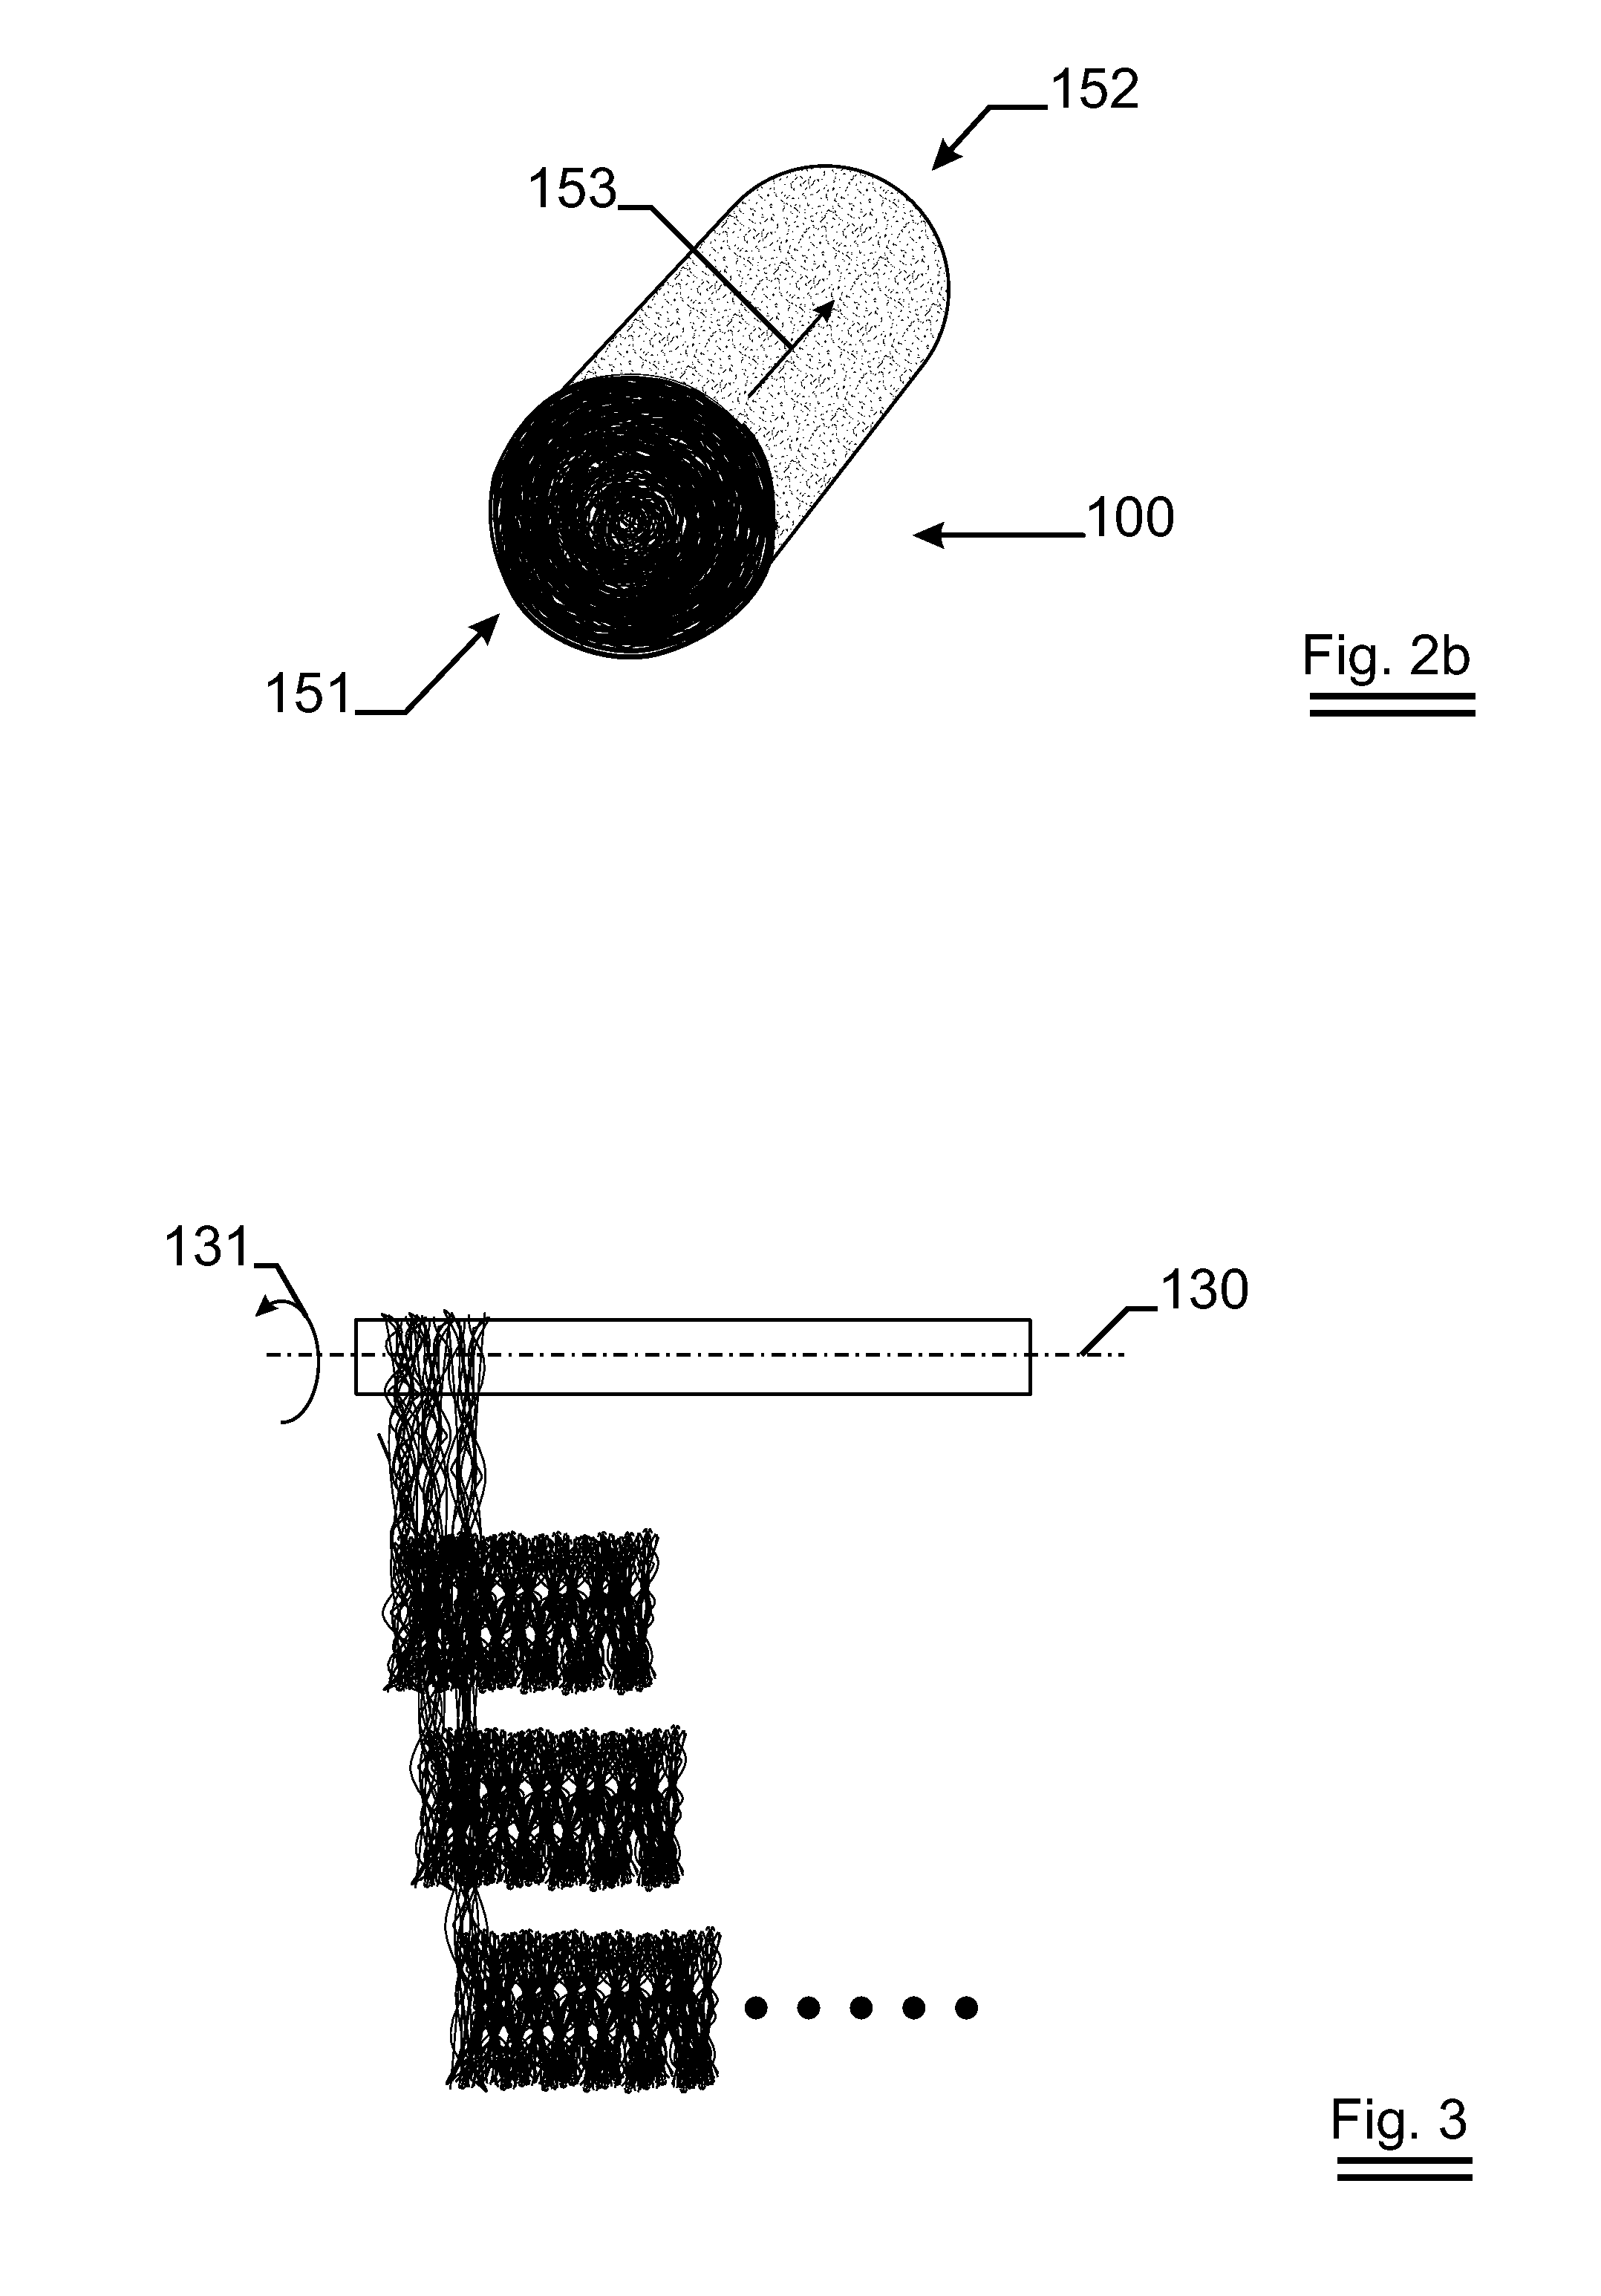 Regenerator for a thermal cycle engine